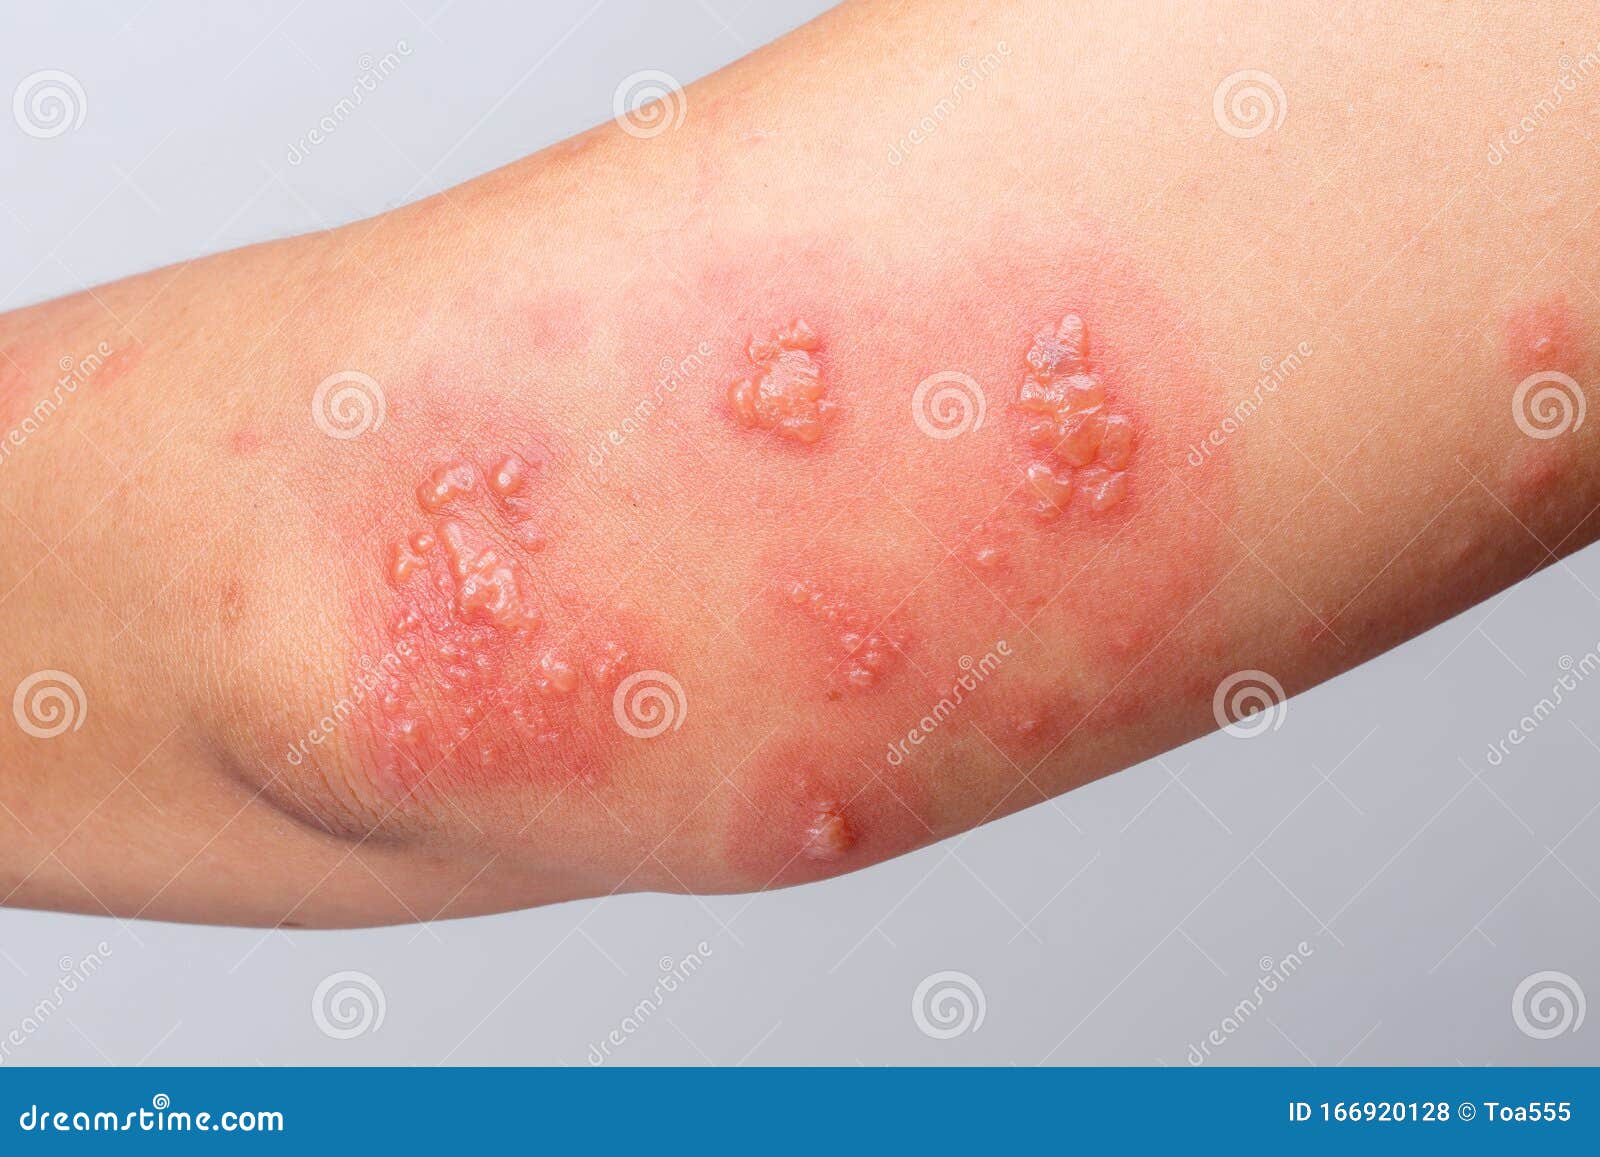 shingles, zoster or herpes zoster symptoms on arm